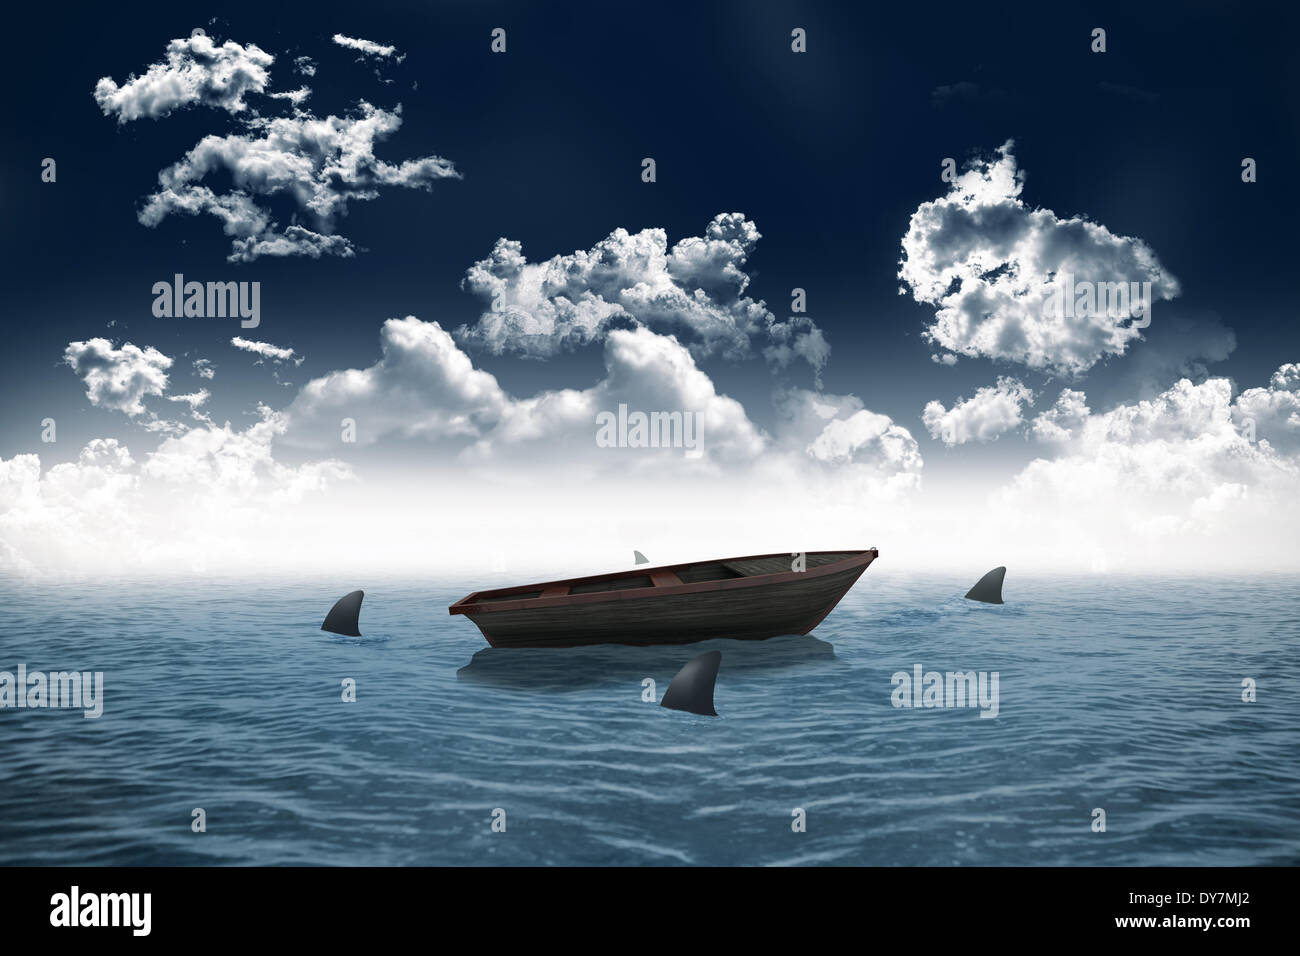 Sharks circling small boat in the sea Stock Photo